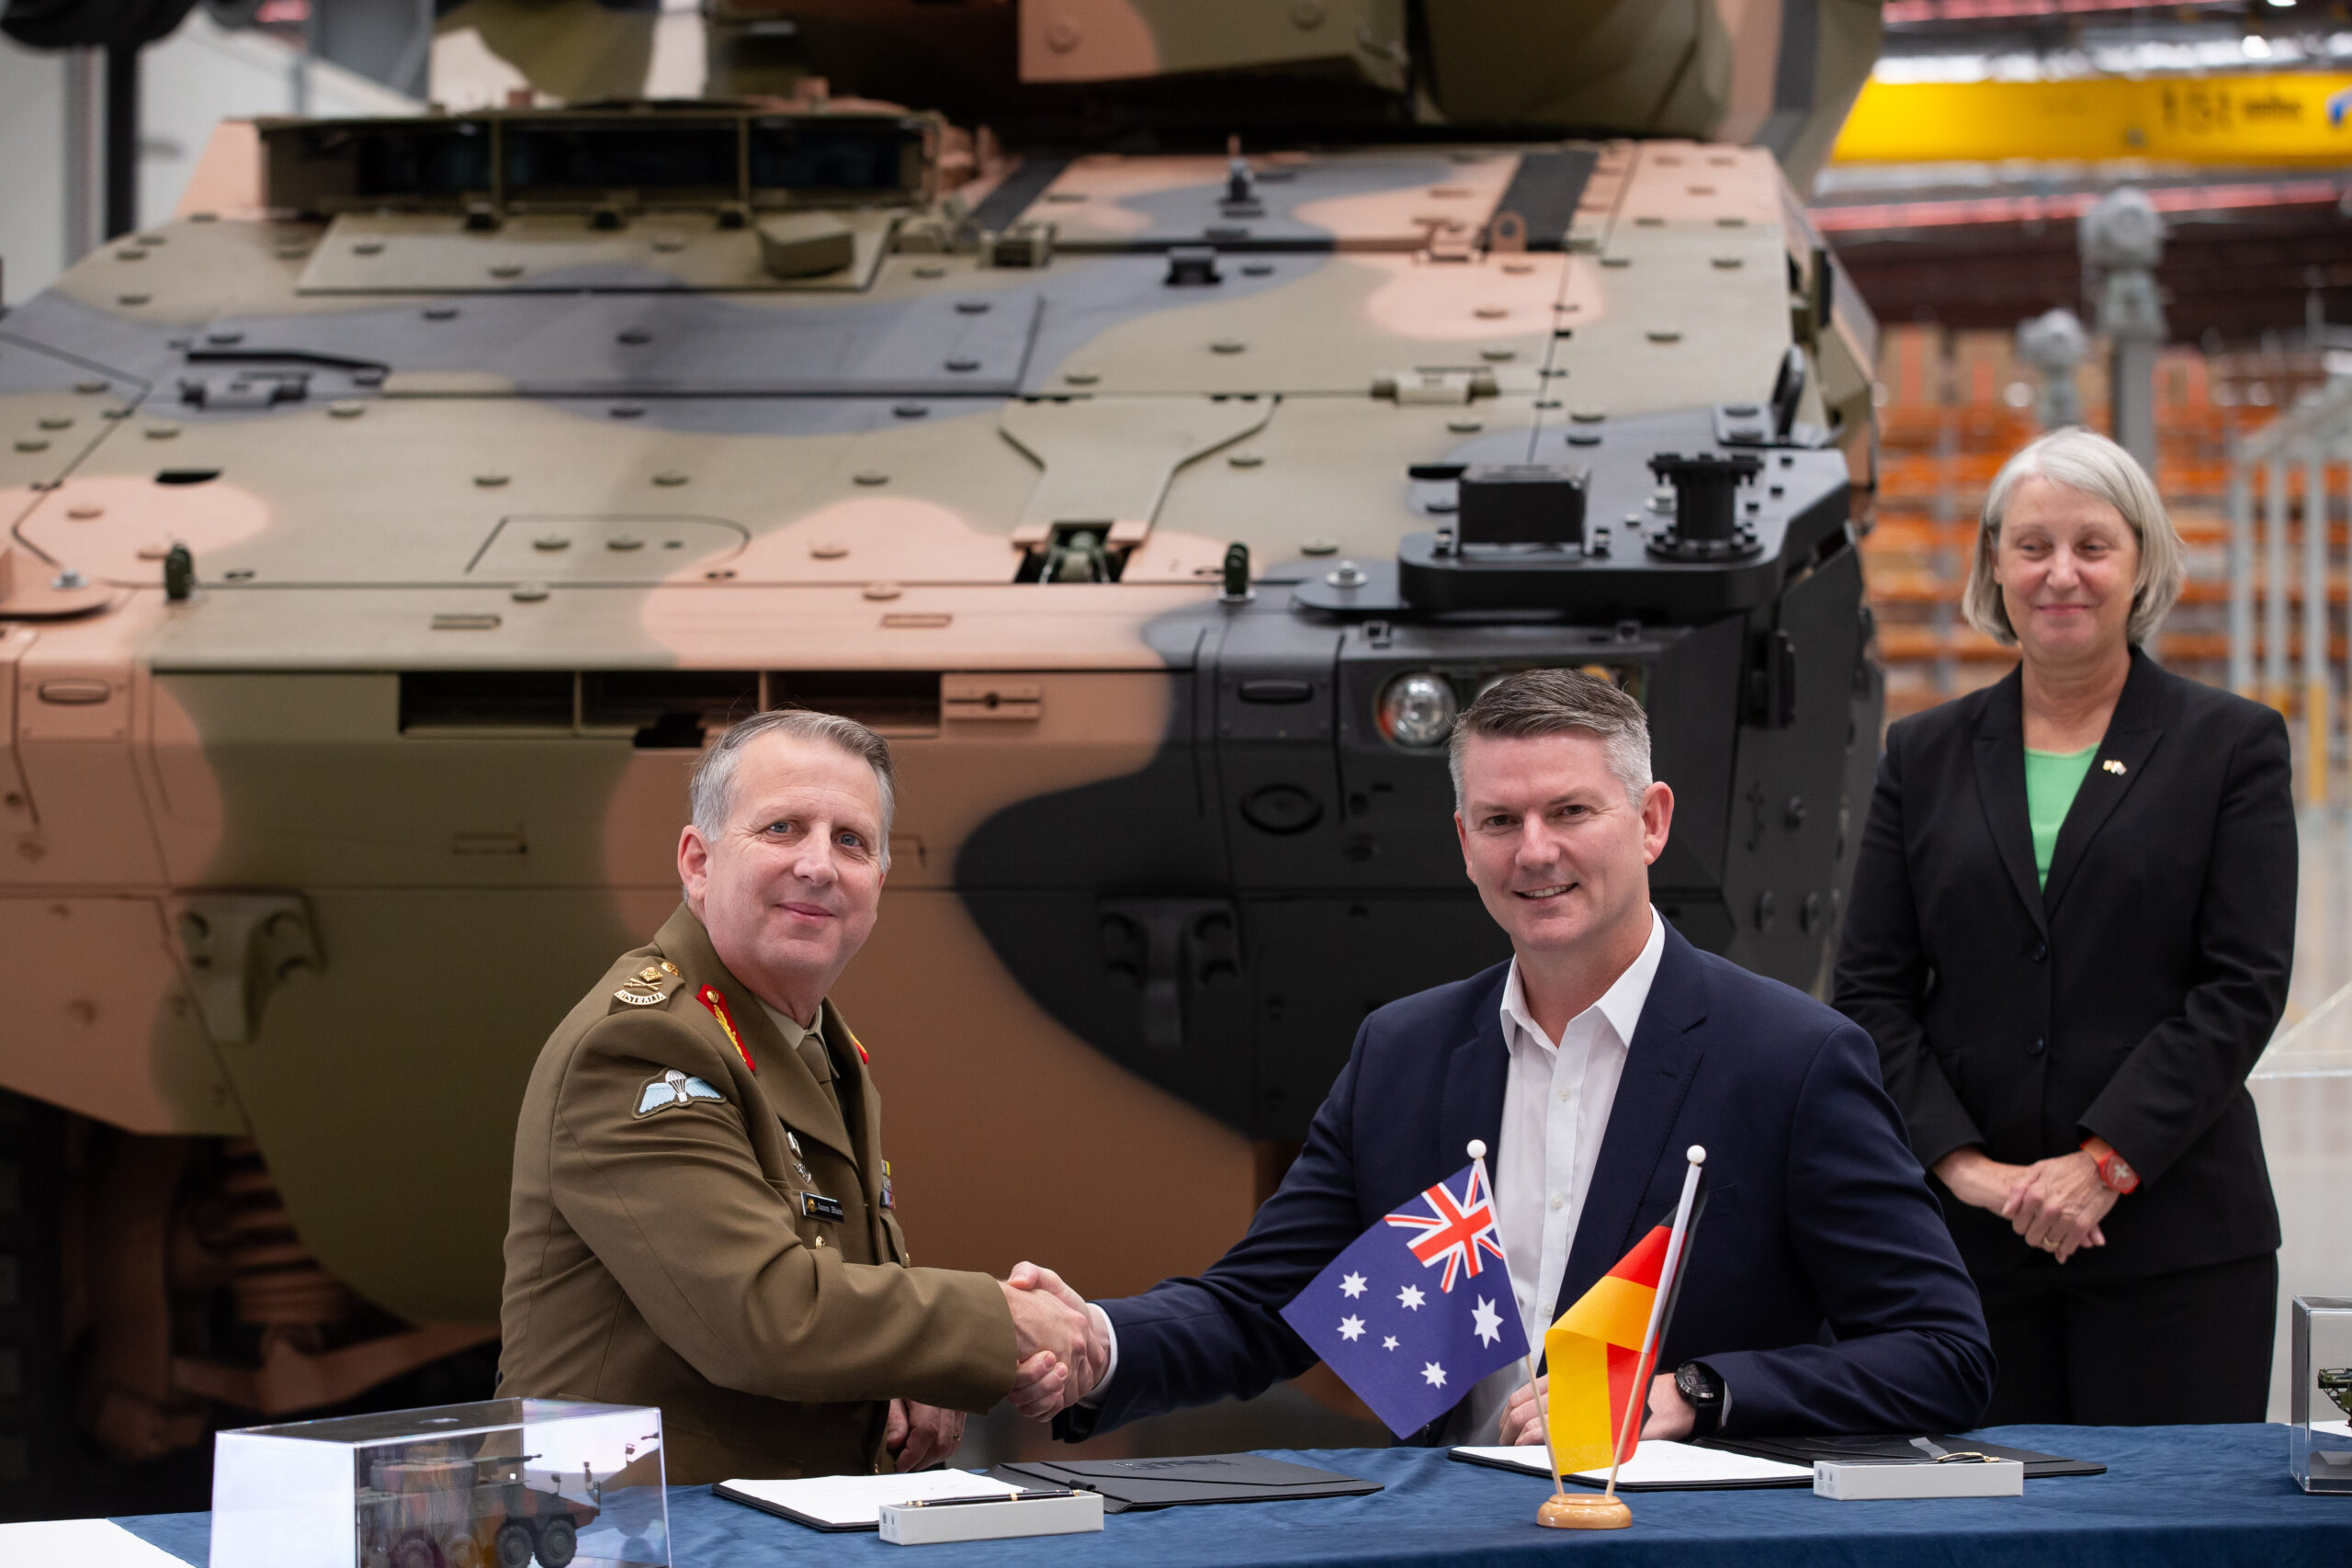 Head Land Systems, Major General Blain and Managing Director Rheinmetall Defence Australia, Nathan Poyner, signed the Production Contract for the Boxer Heavy Weapon Carrier Vehicle Export, observed by German Ambassador to Australia, Beate Grzeski, in Brisbane on 10 April 2024. *** Local Caption *** Head Land Systems, Major General Blain and Managing Director Rheinmetall Defence Australia, Nathan Poyner, signed the Production Contract for the Boxer Heavy Weapon Carrier Vehicle Export. The event was observed by the German Ambassador to Australia, Beate Grzeski, and occurred at the Rheinmetall Military Vehicle Centre of Excellence in Redbank, Queensland on 10 April 2024. The signing the production contract fulfils the intent of the bilateral agreement signed by the Australian and German Governments in March, to export more than 100 Australian-made Boxer Heavy Weapon Carrier vehicles to Germany.